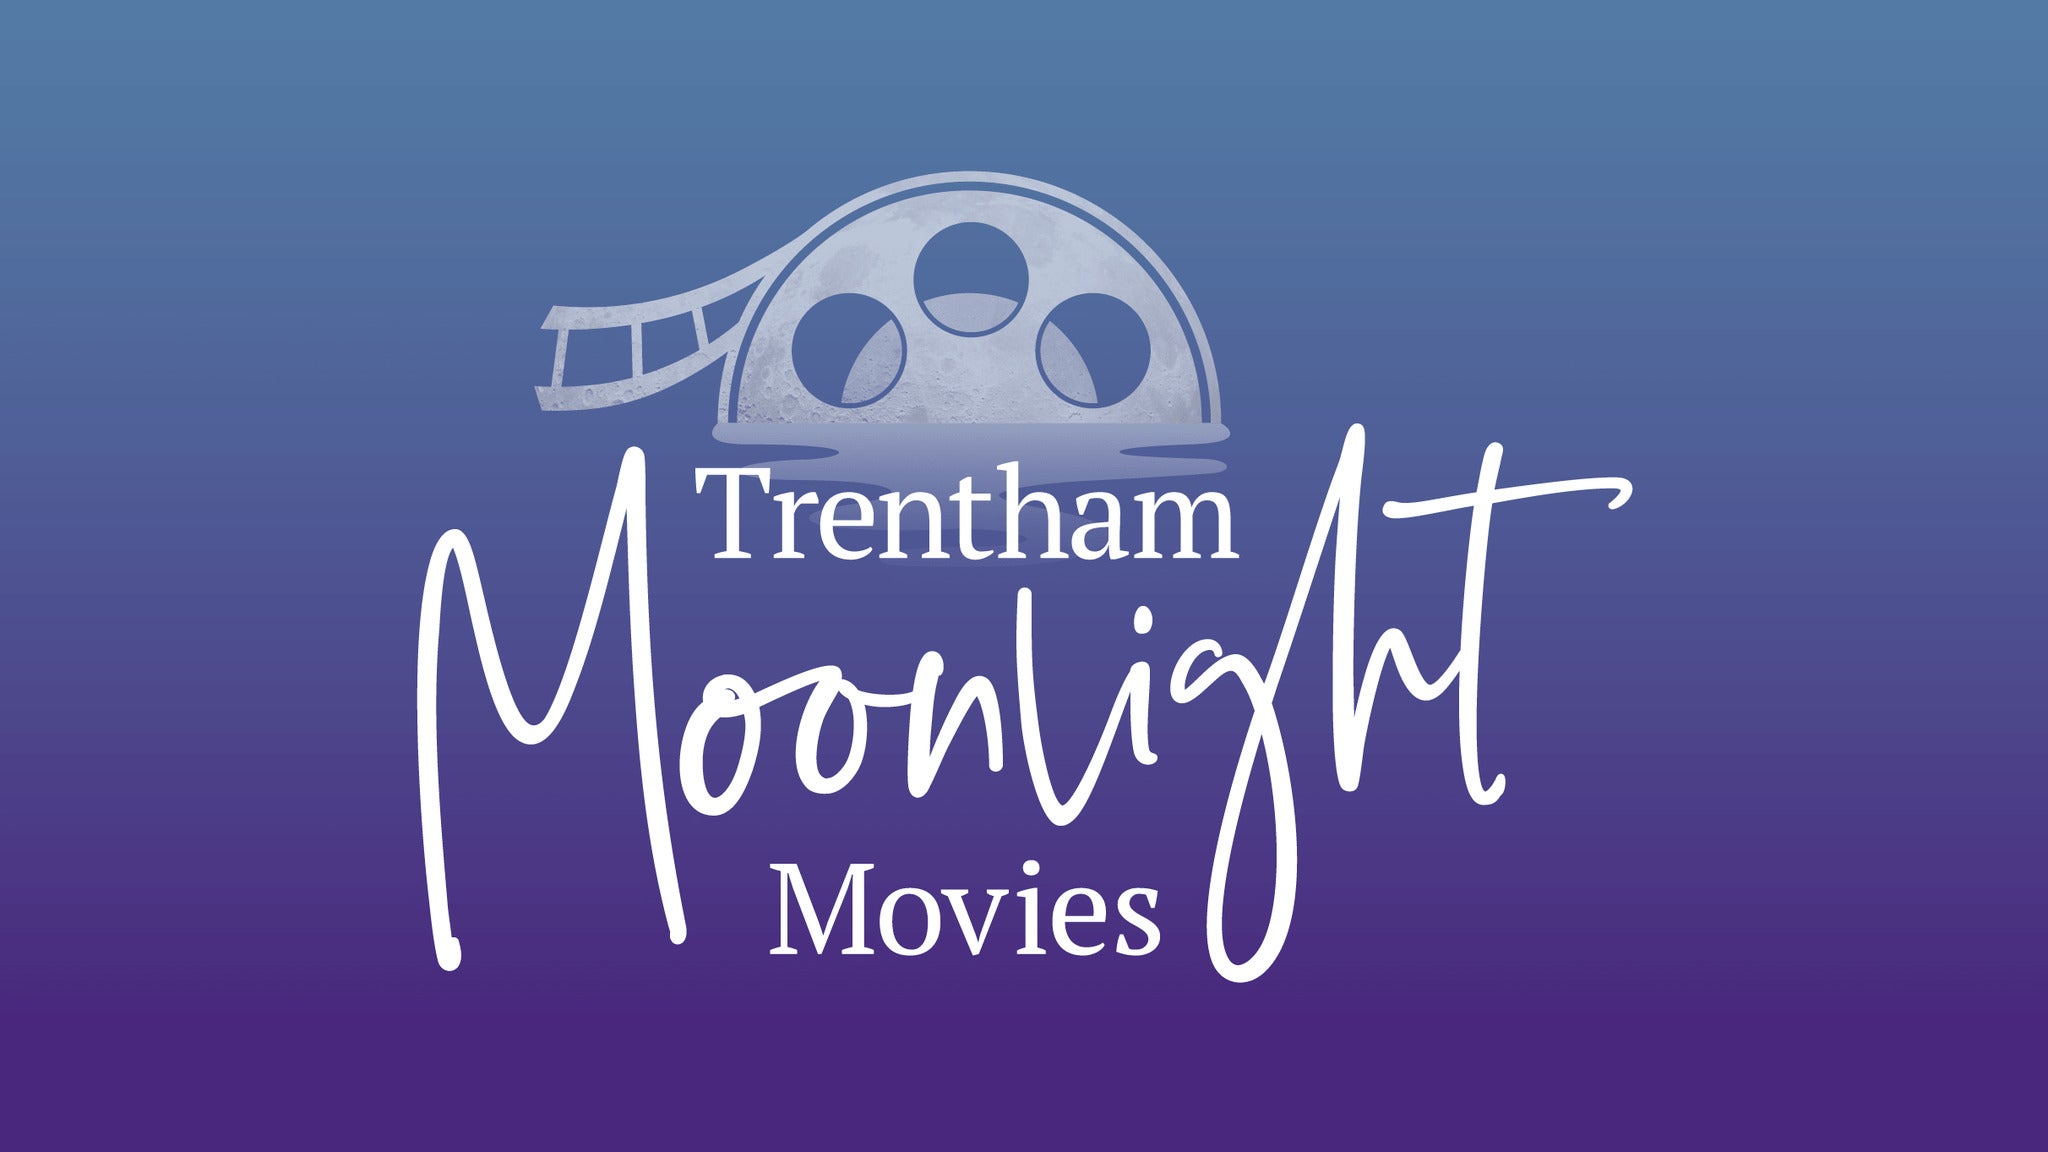 Trentham Moonlight Movies - The Greatest Showman (PG) Event Title Pic